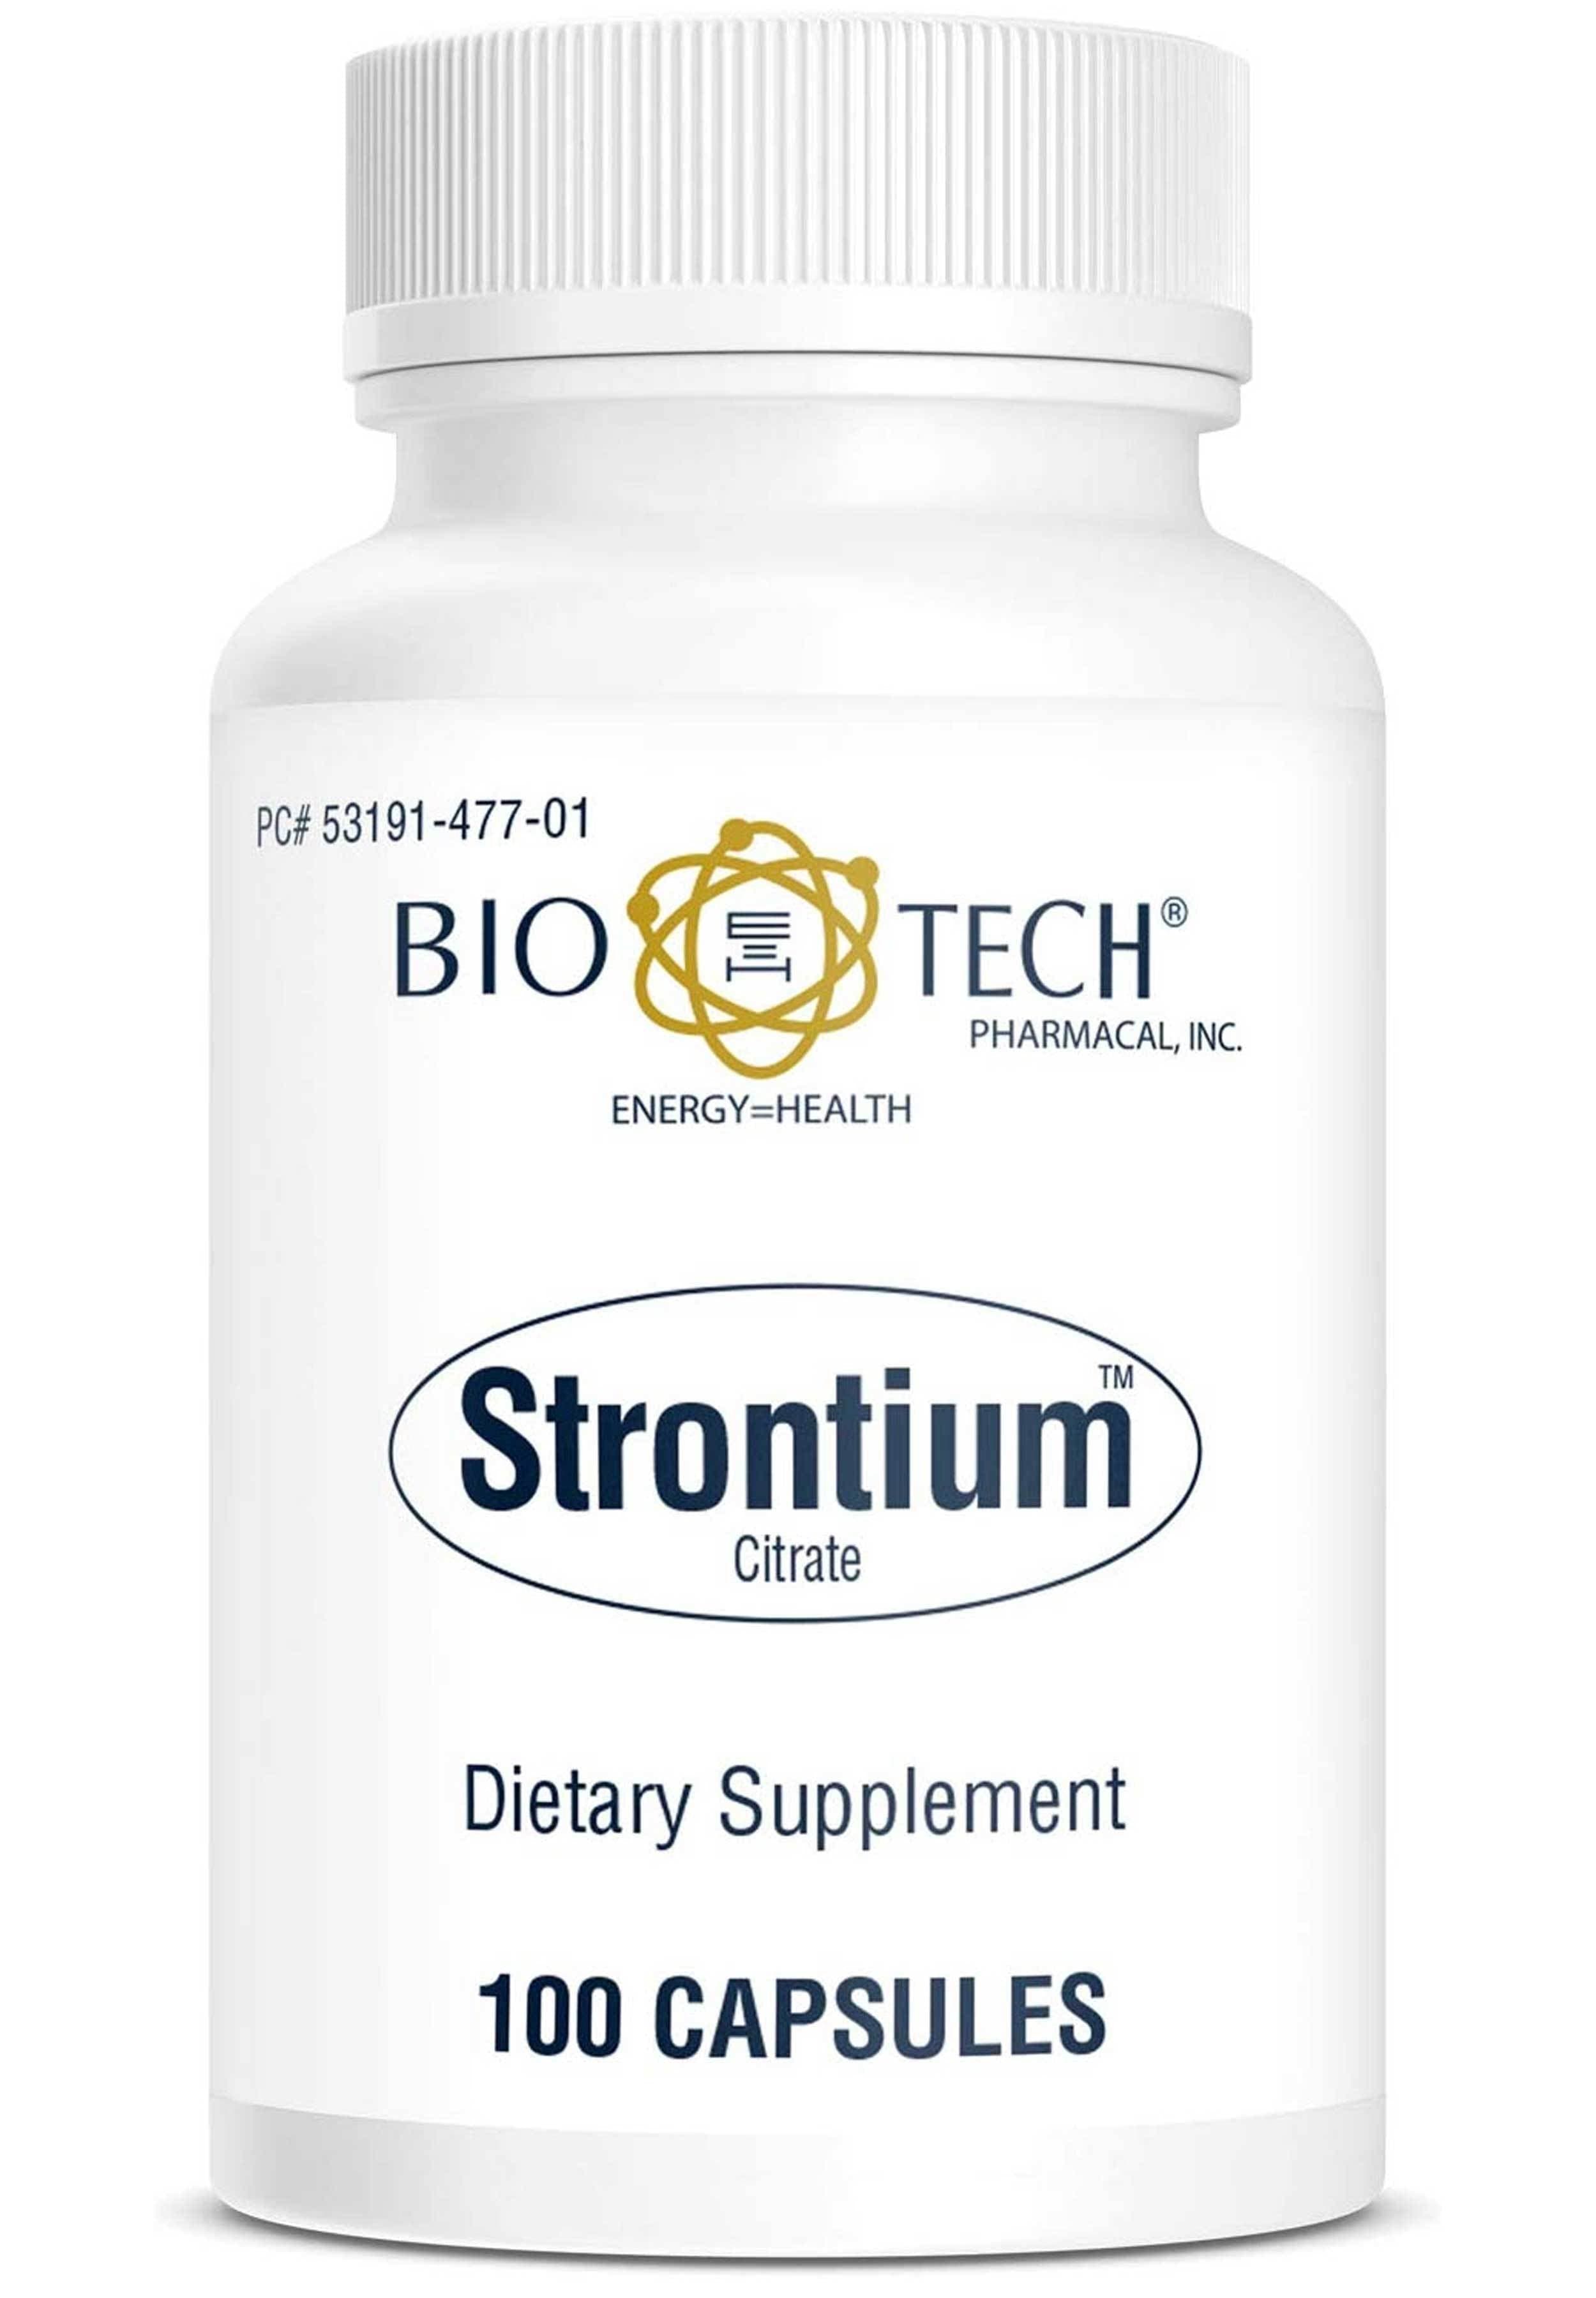 Bio-Tech Pharmacal Strontium Citrate